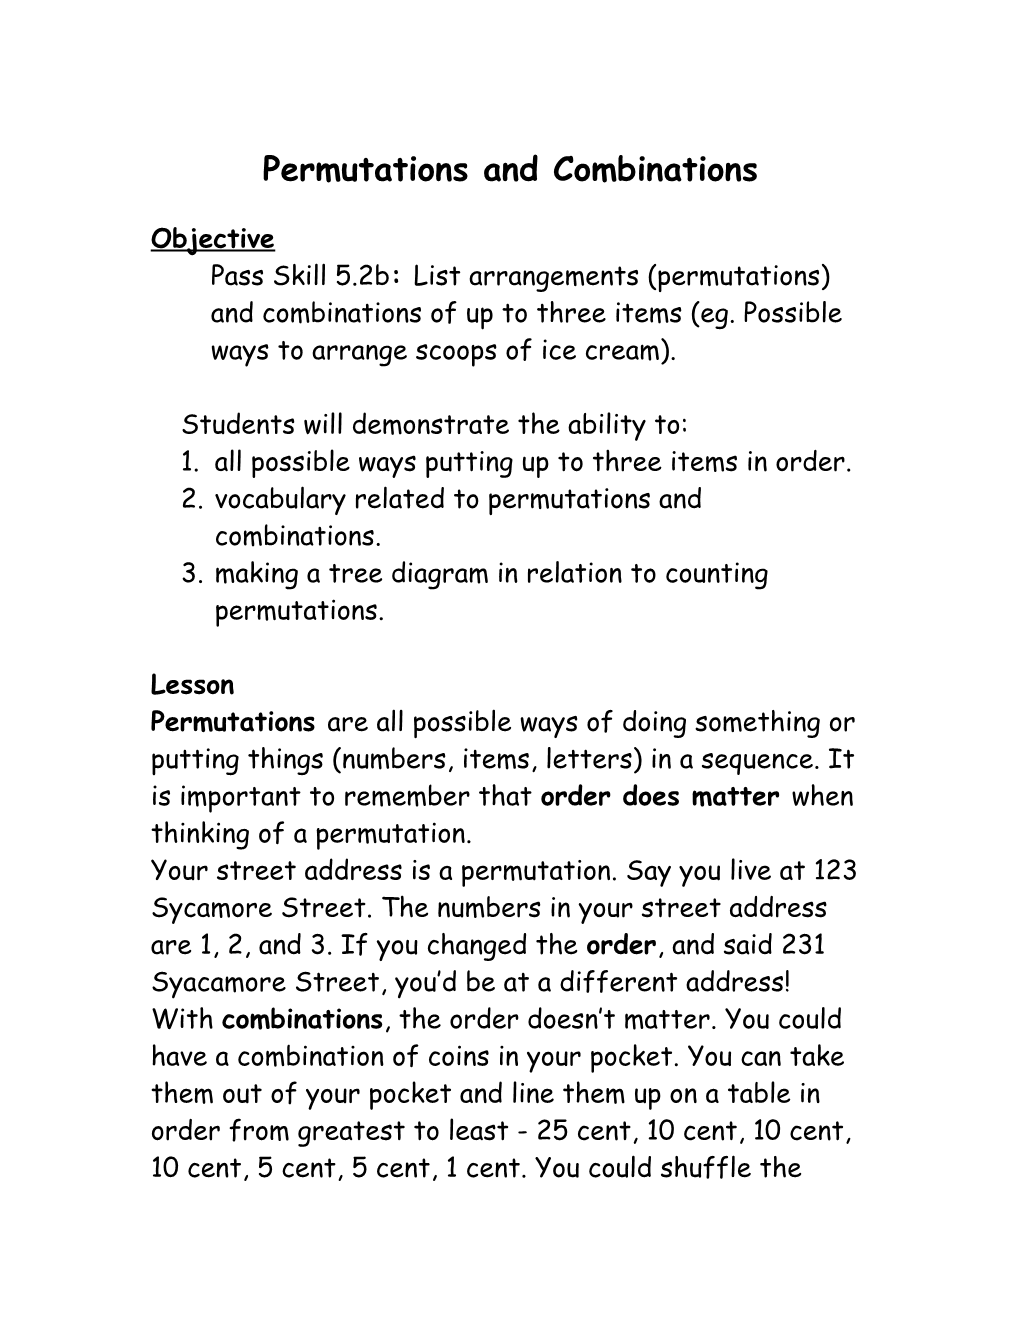 Permutations and Combinations s2